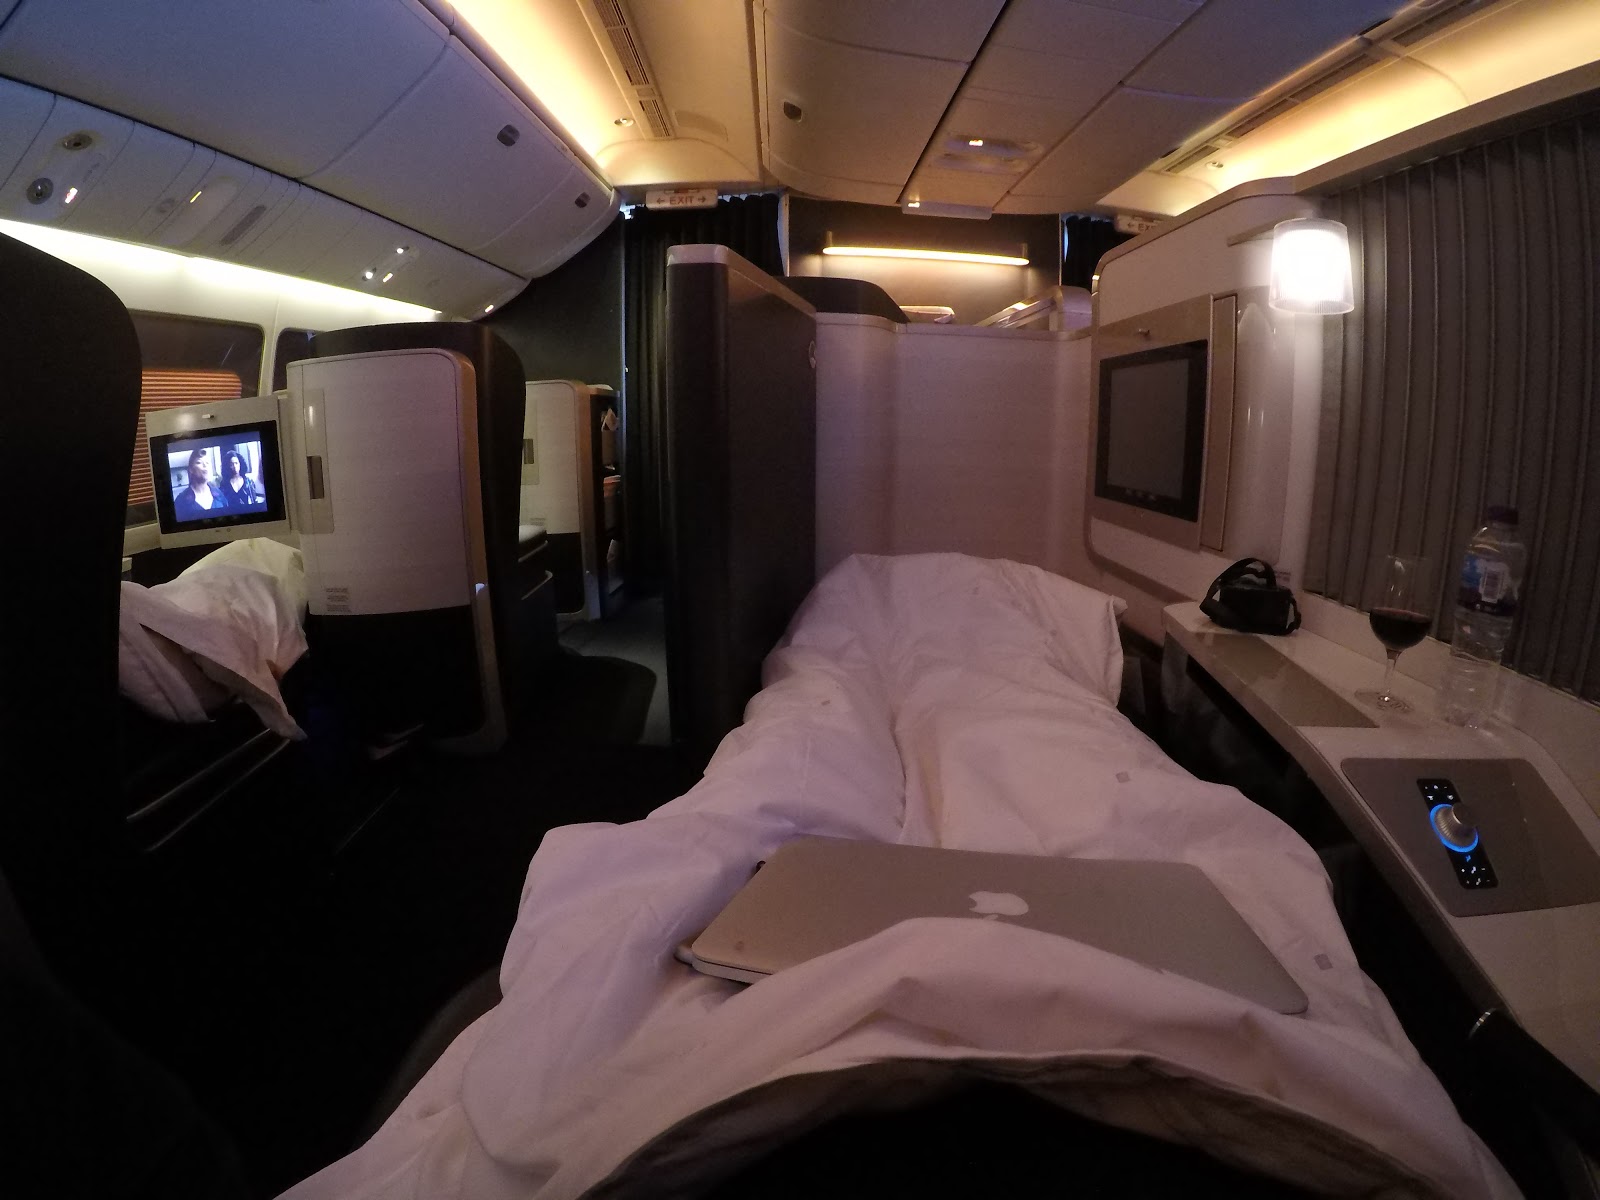 Review of British Airways First Class flight from London Gatwick in 2018 by www.CalMcTravels.com